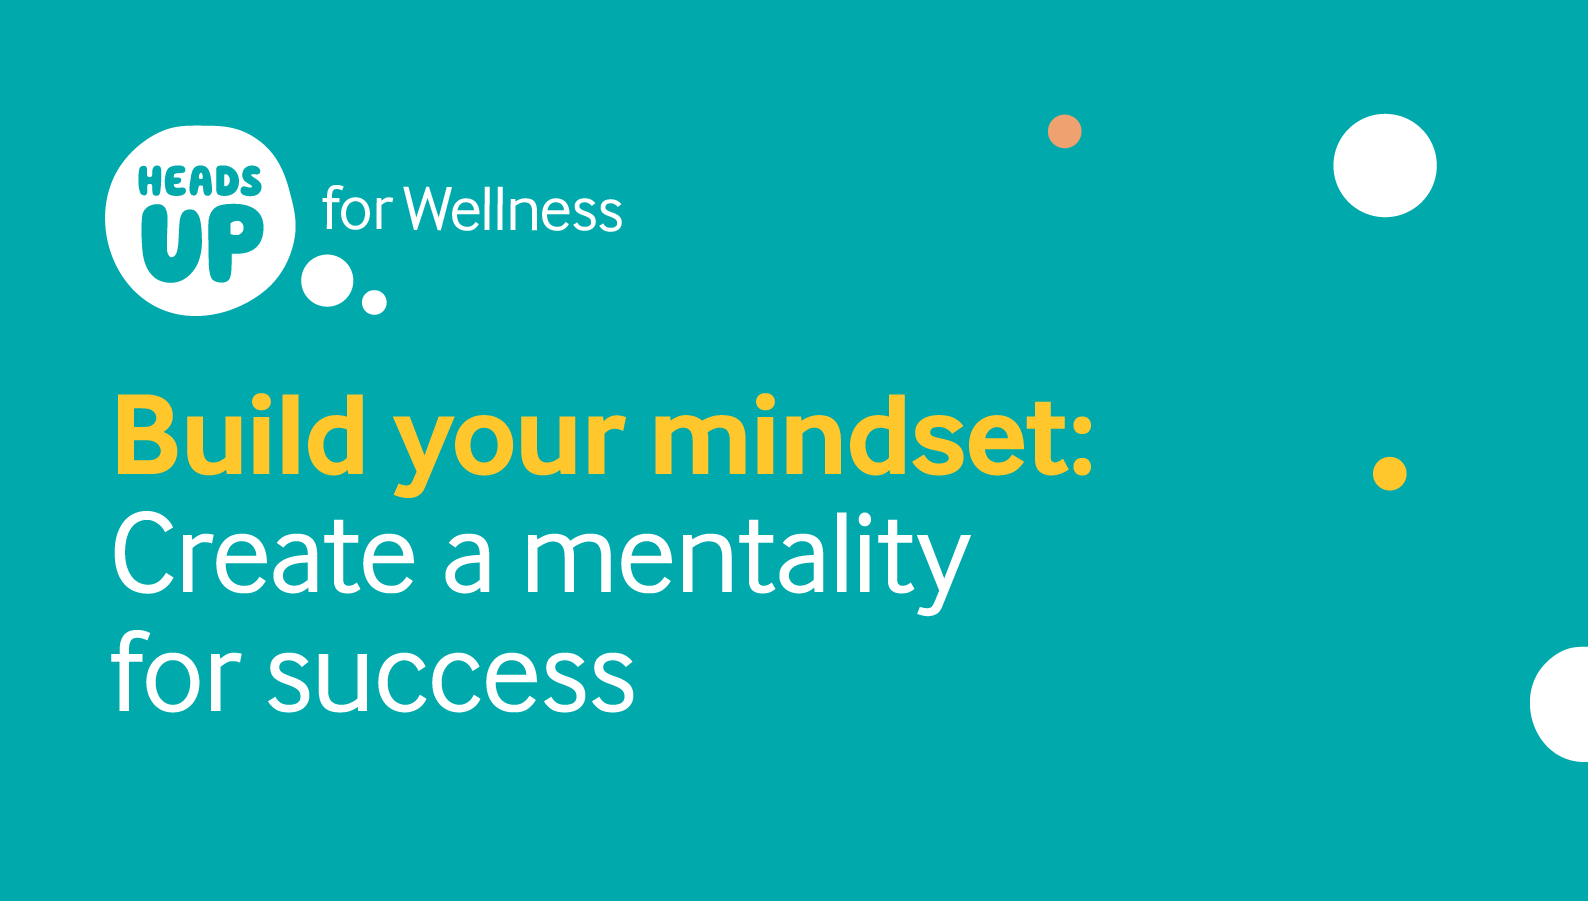 Build your mindset: Resources to help you create a mentality for success